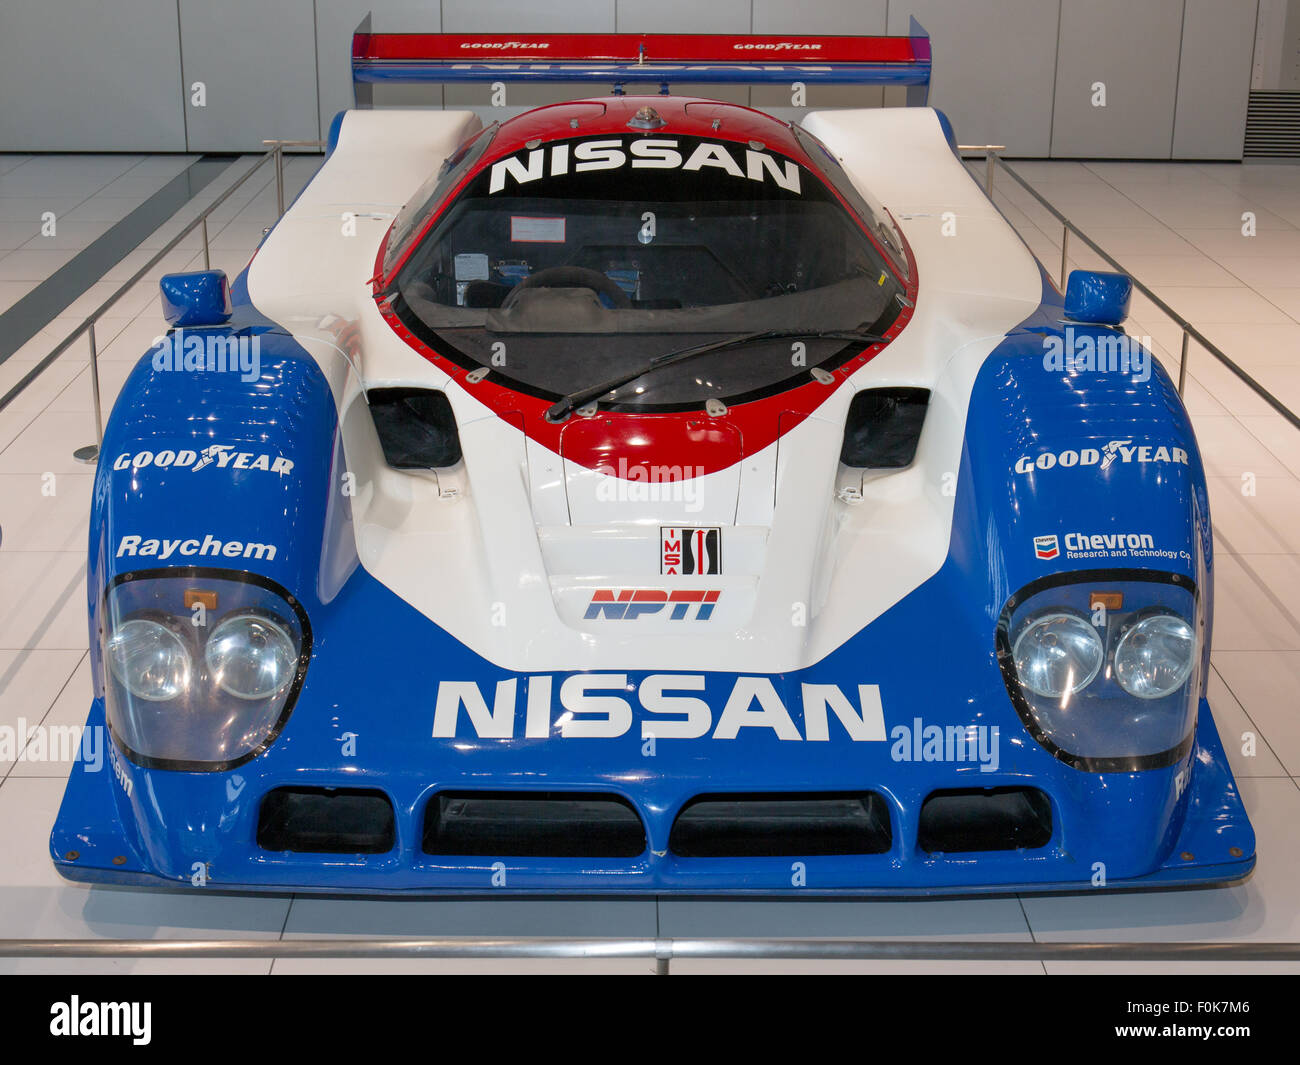 Nissan R90CK Front 2015 Nissan Global Headquarters Gallery Stockfoto